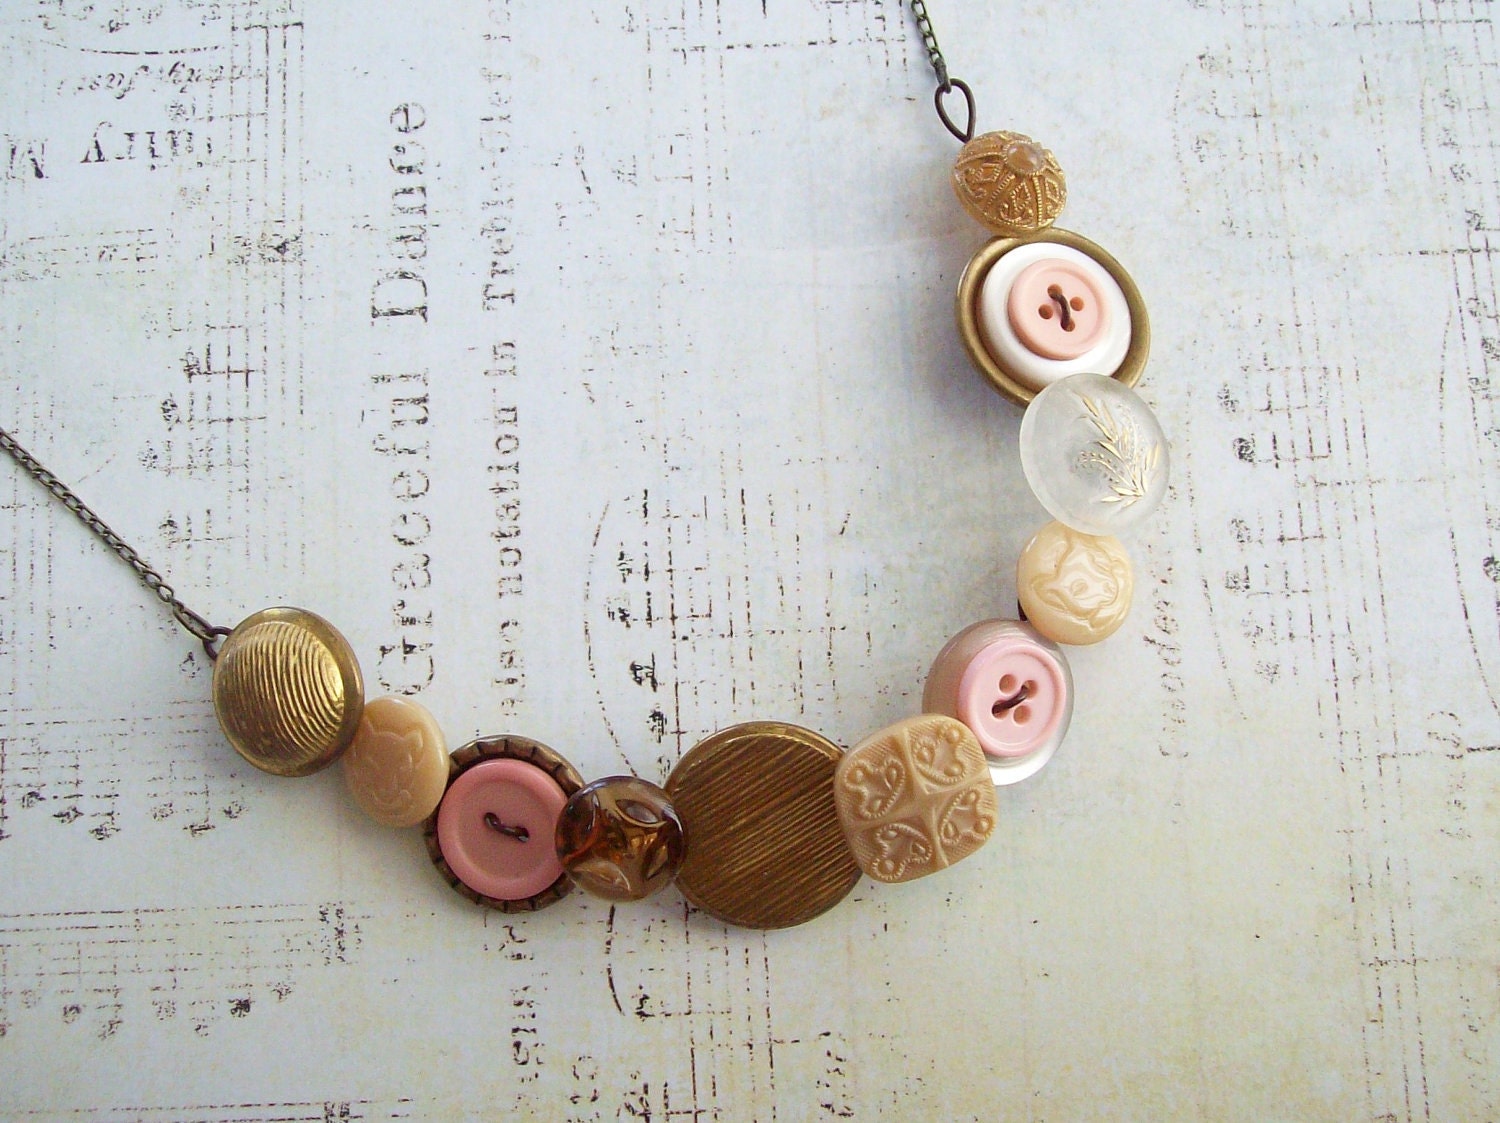 Reclaimed Vintage Button Necklace